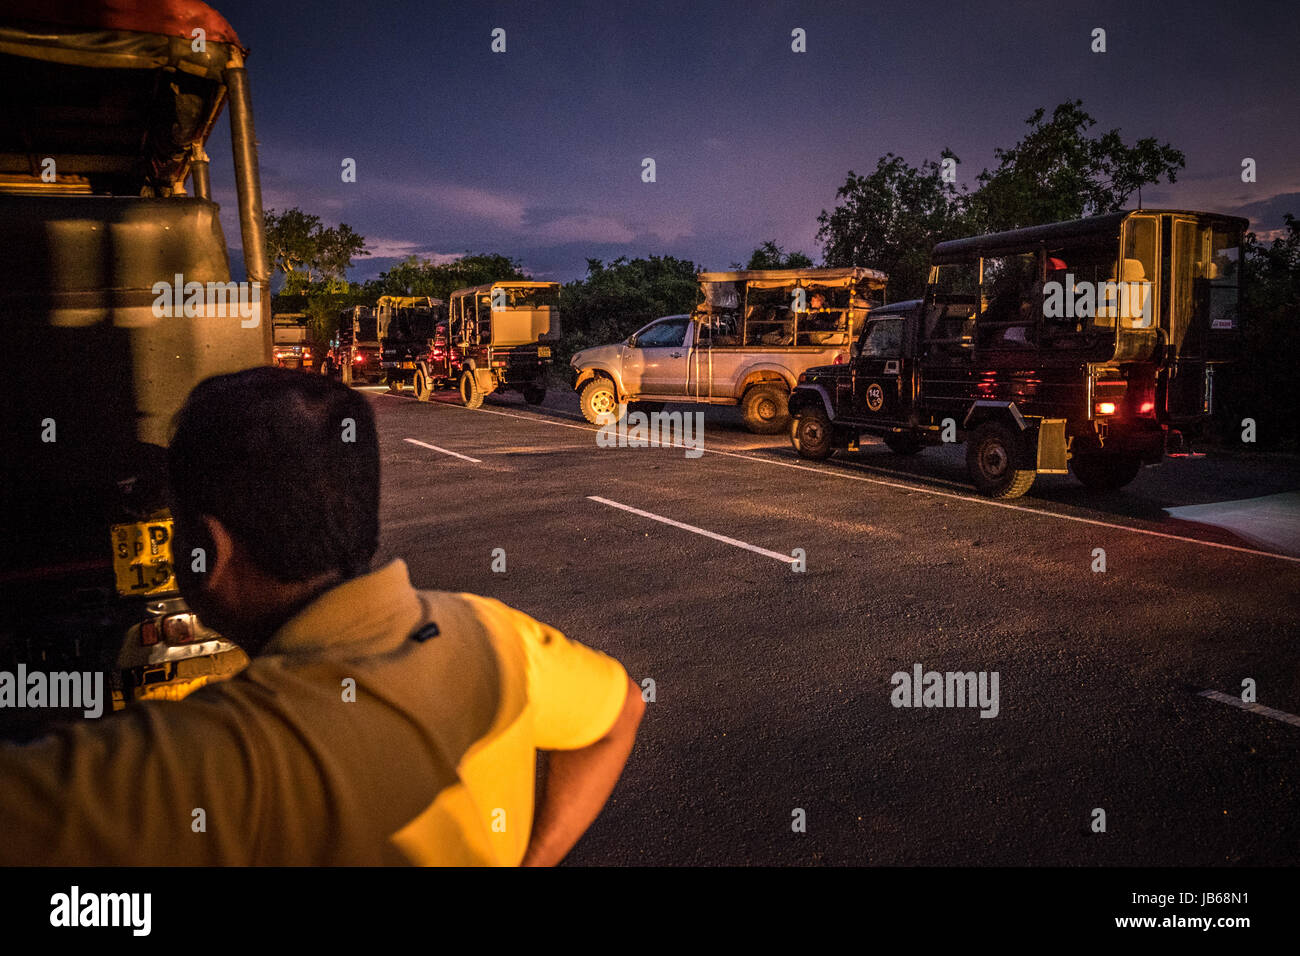 Jeeps waiting for the Yala National Park to open in the morning - Sri Lanka Stock Photo